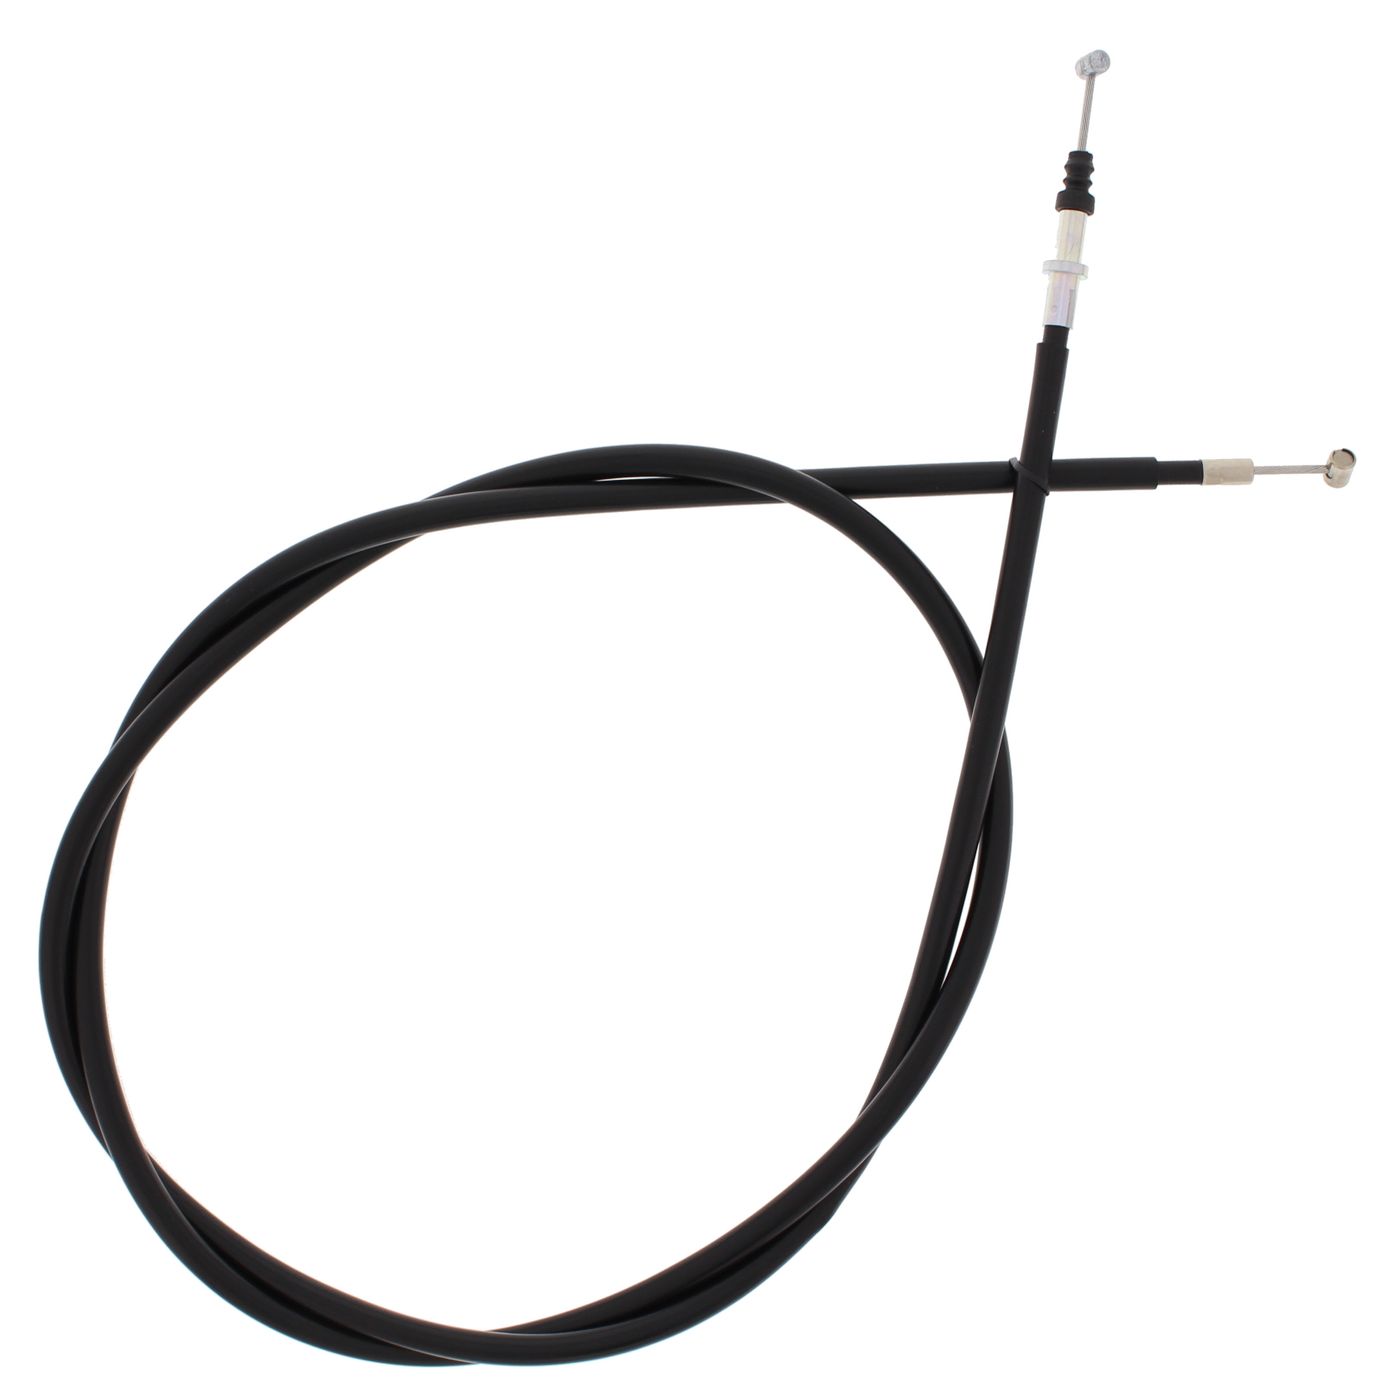 Wrp Brake Cables - WRP454063 image